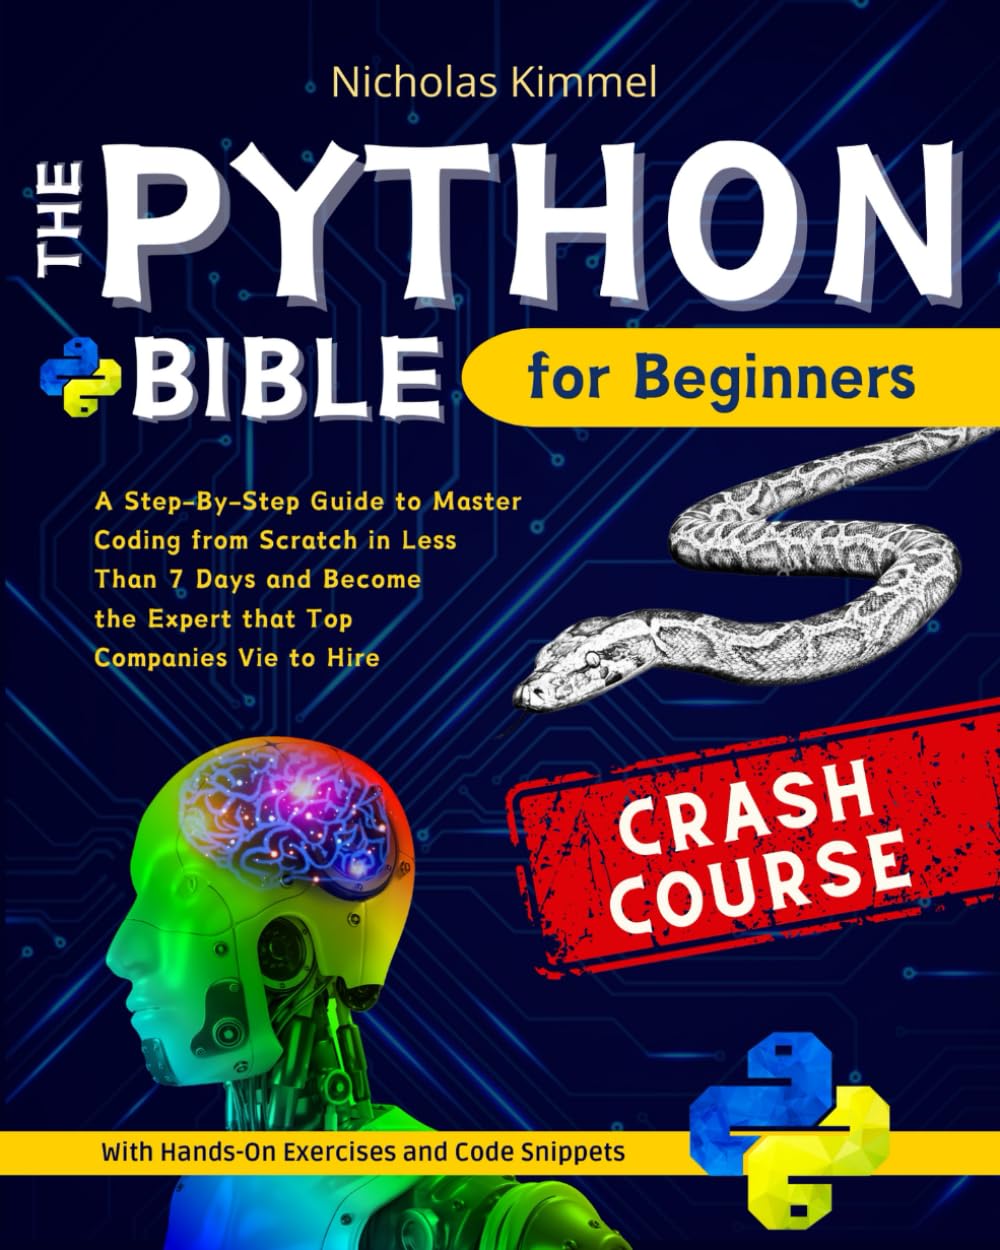 The Python Bible for Beginners: A Step-By-Step Guide to Master Coding from Scratch in Less Than 7 Days and Become the Expert that Top Companies Vie to Hire (with Hands-On Exercises and Code Snippets)